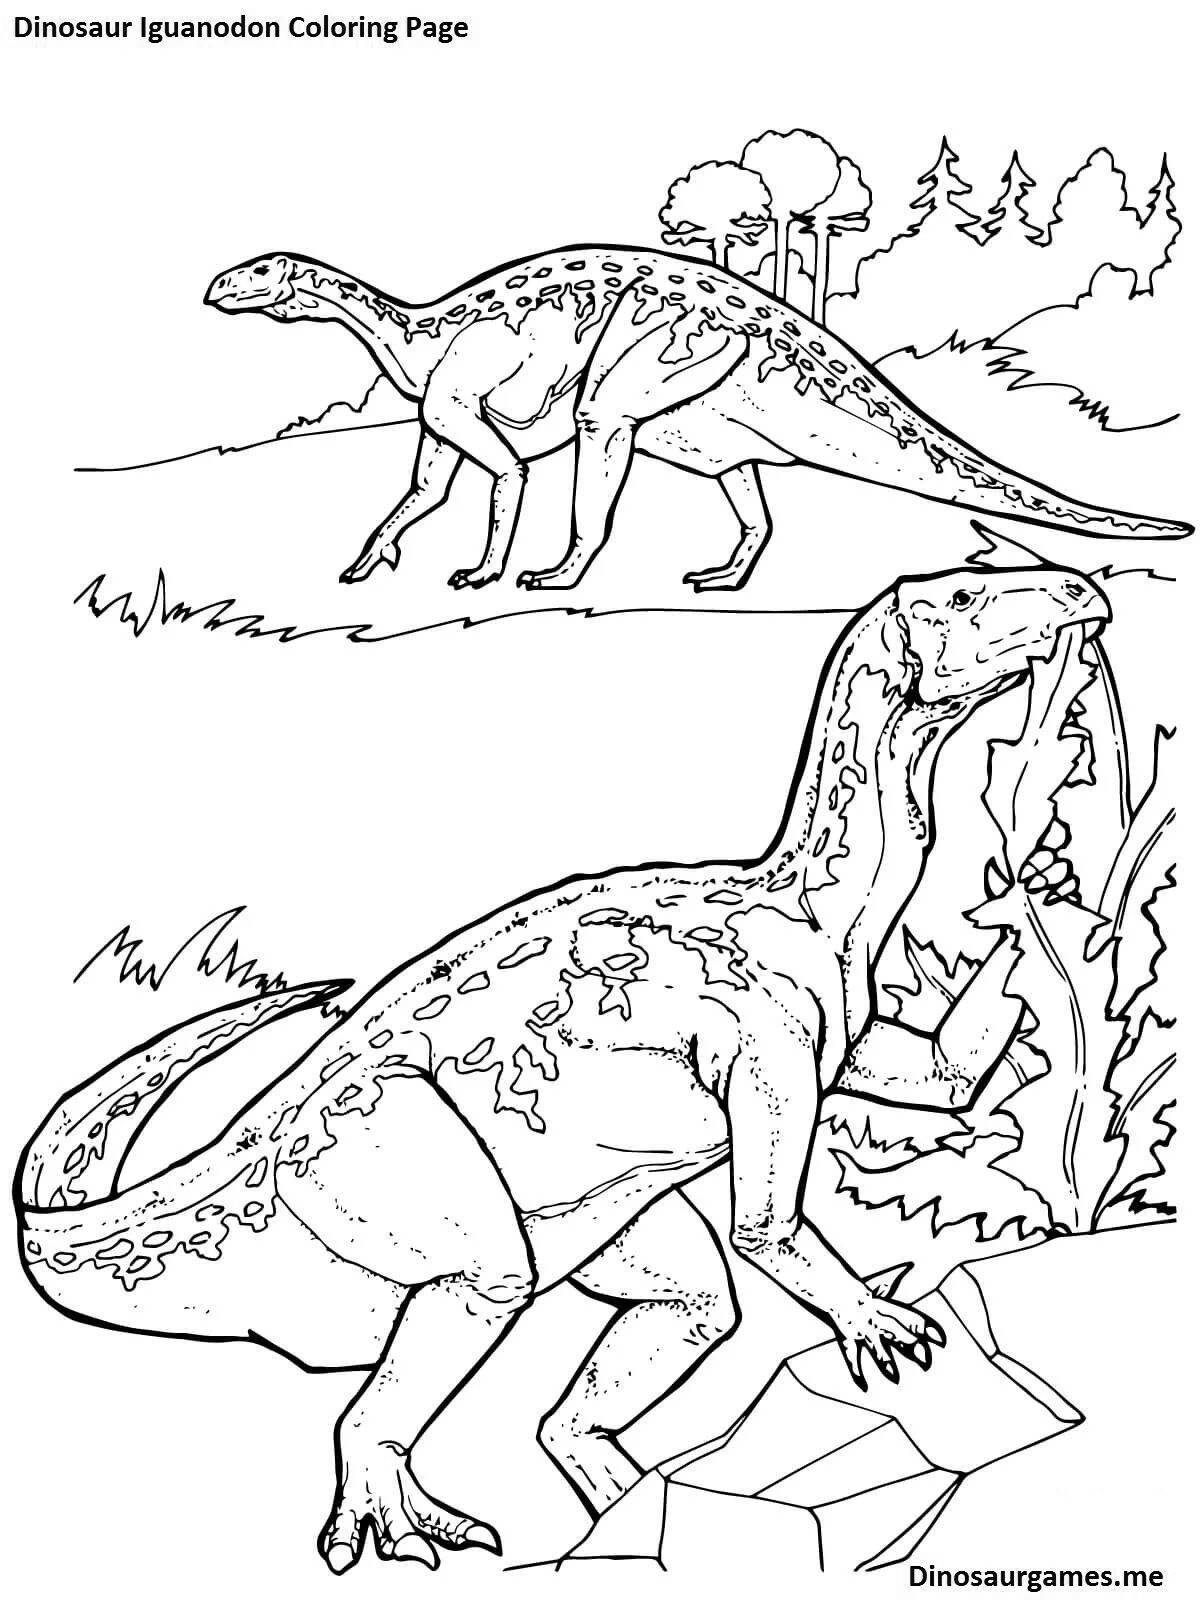 Iguanodon relaxing coloring page